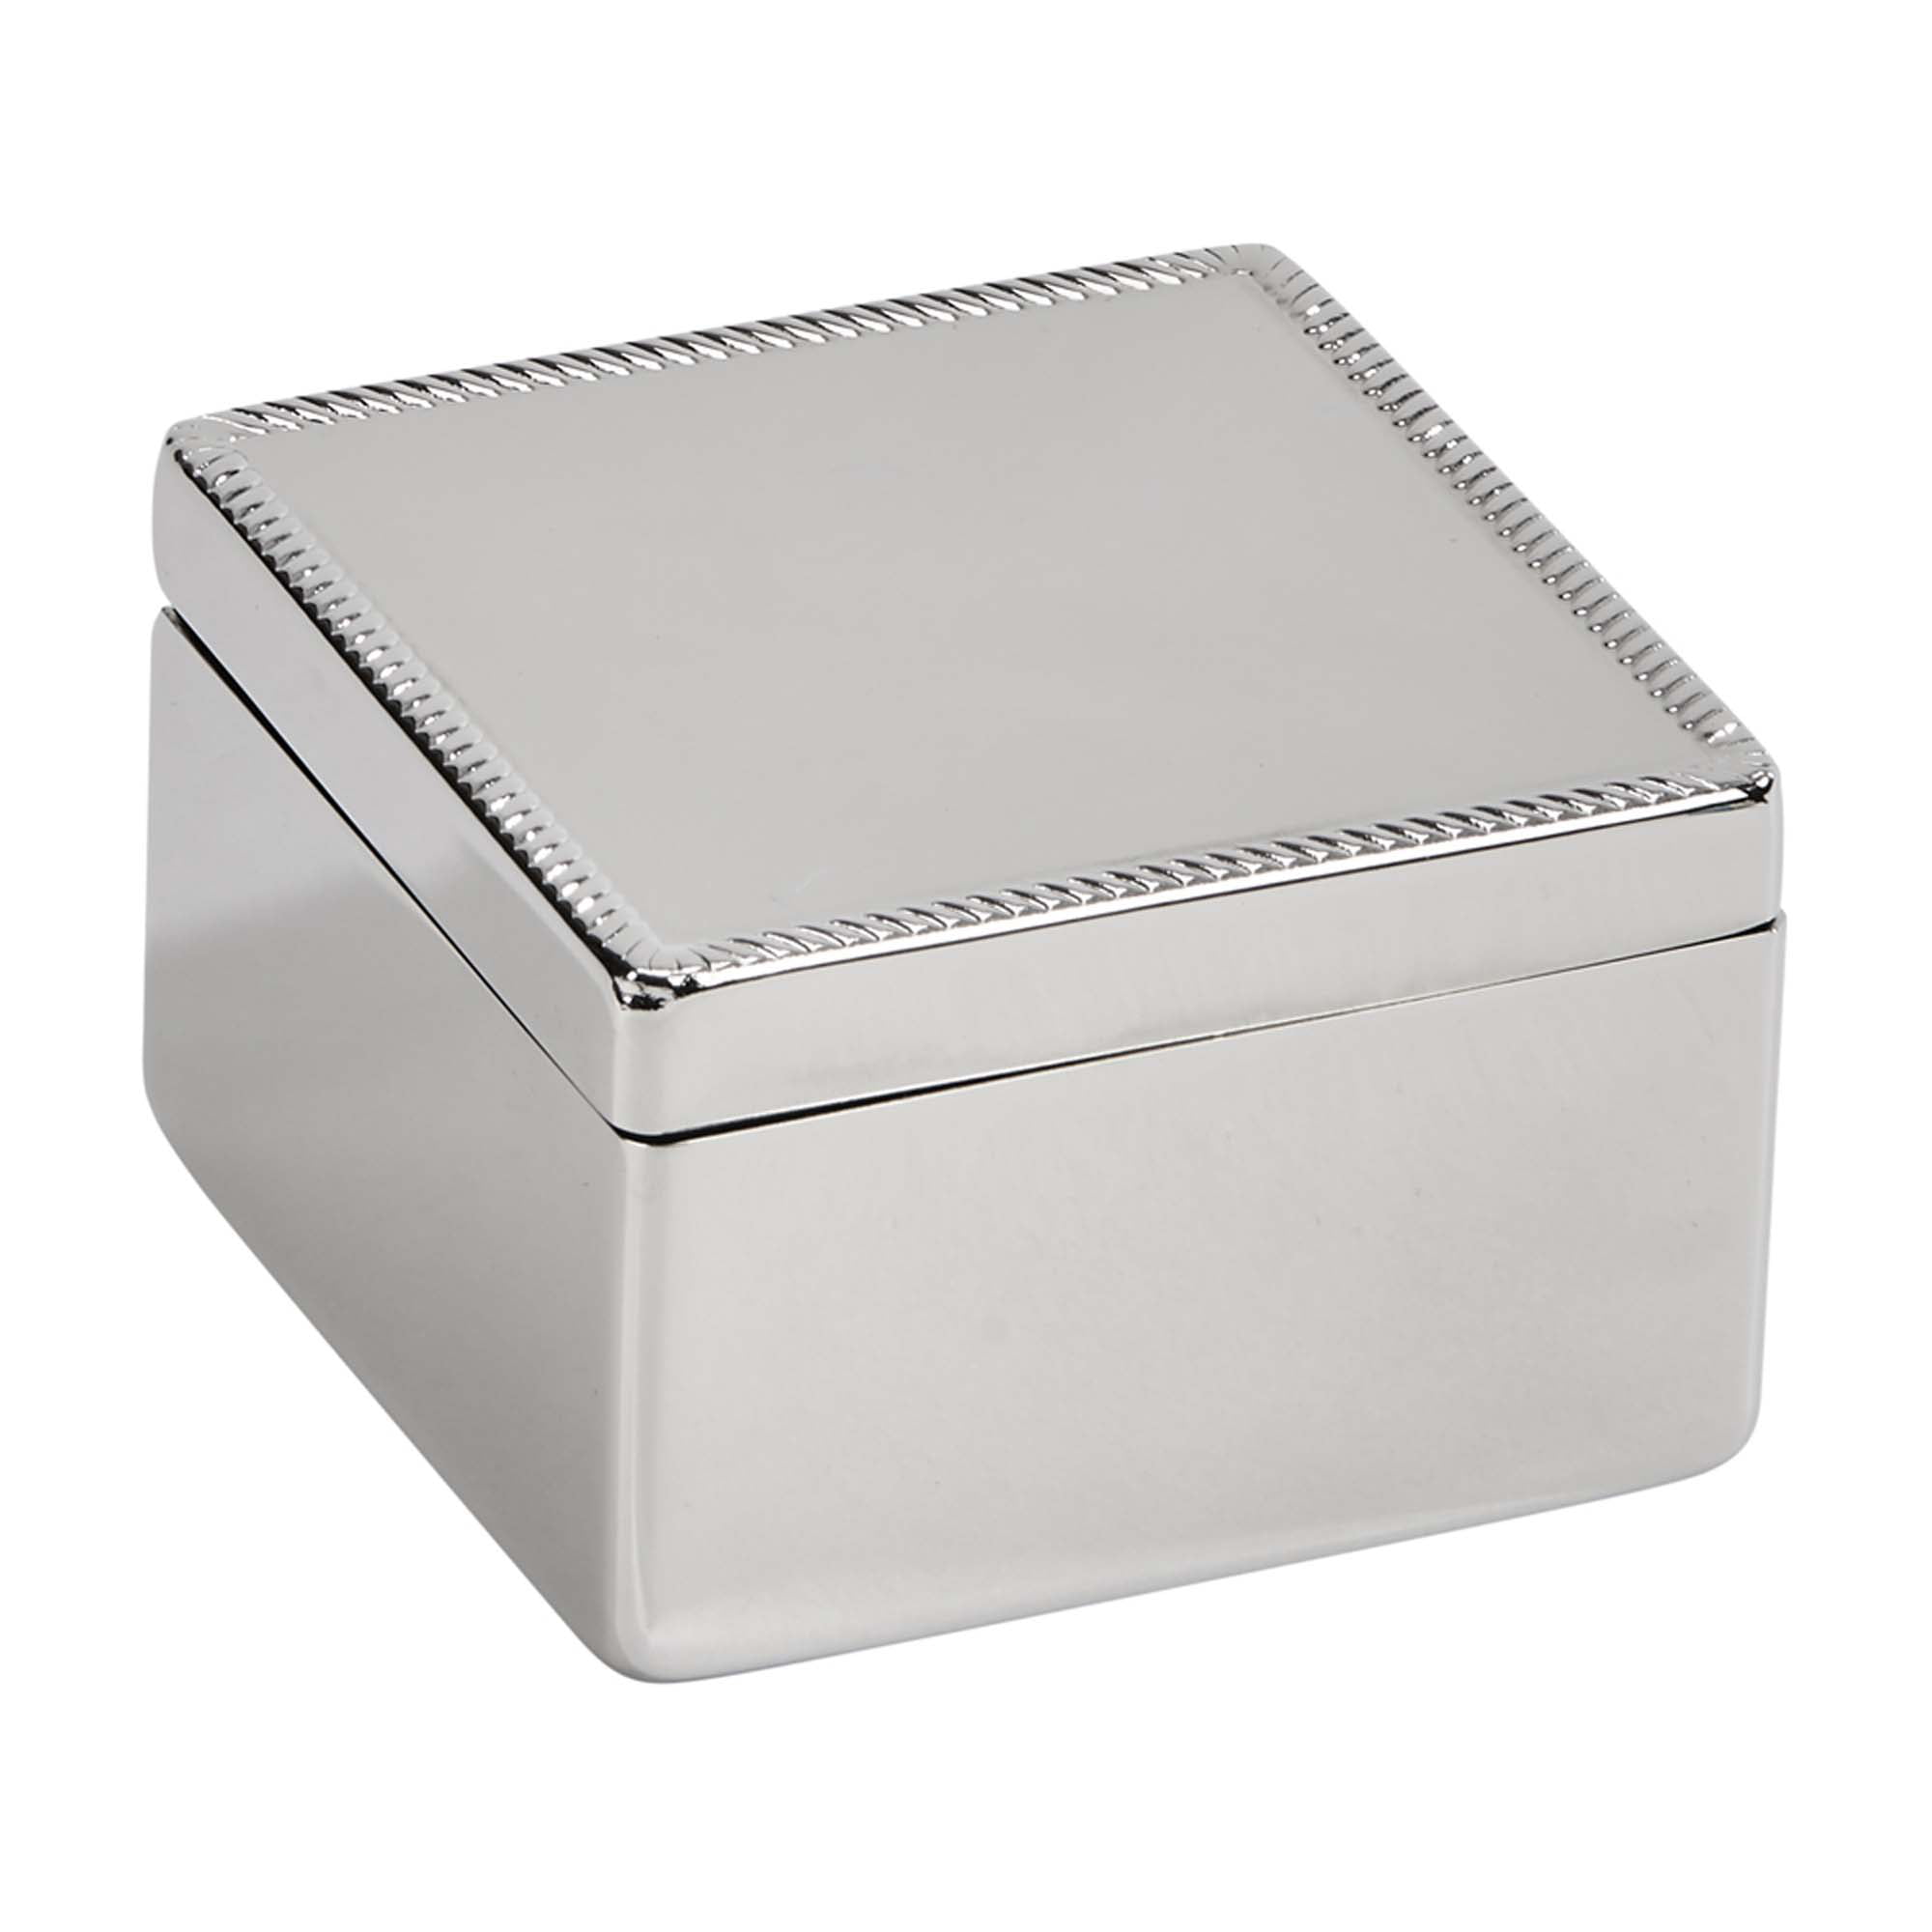 Metal Four Tin Organizer with Handles, 9” x 5½”, Galvanized Gray Green  Rust, Handy organizer w/ 4 tin containers and wooden handles. Rust finish.  By Colonial Tin Works - Walmart.com